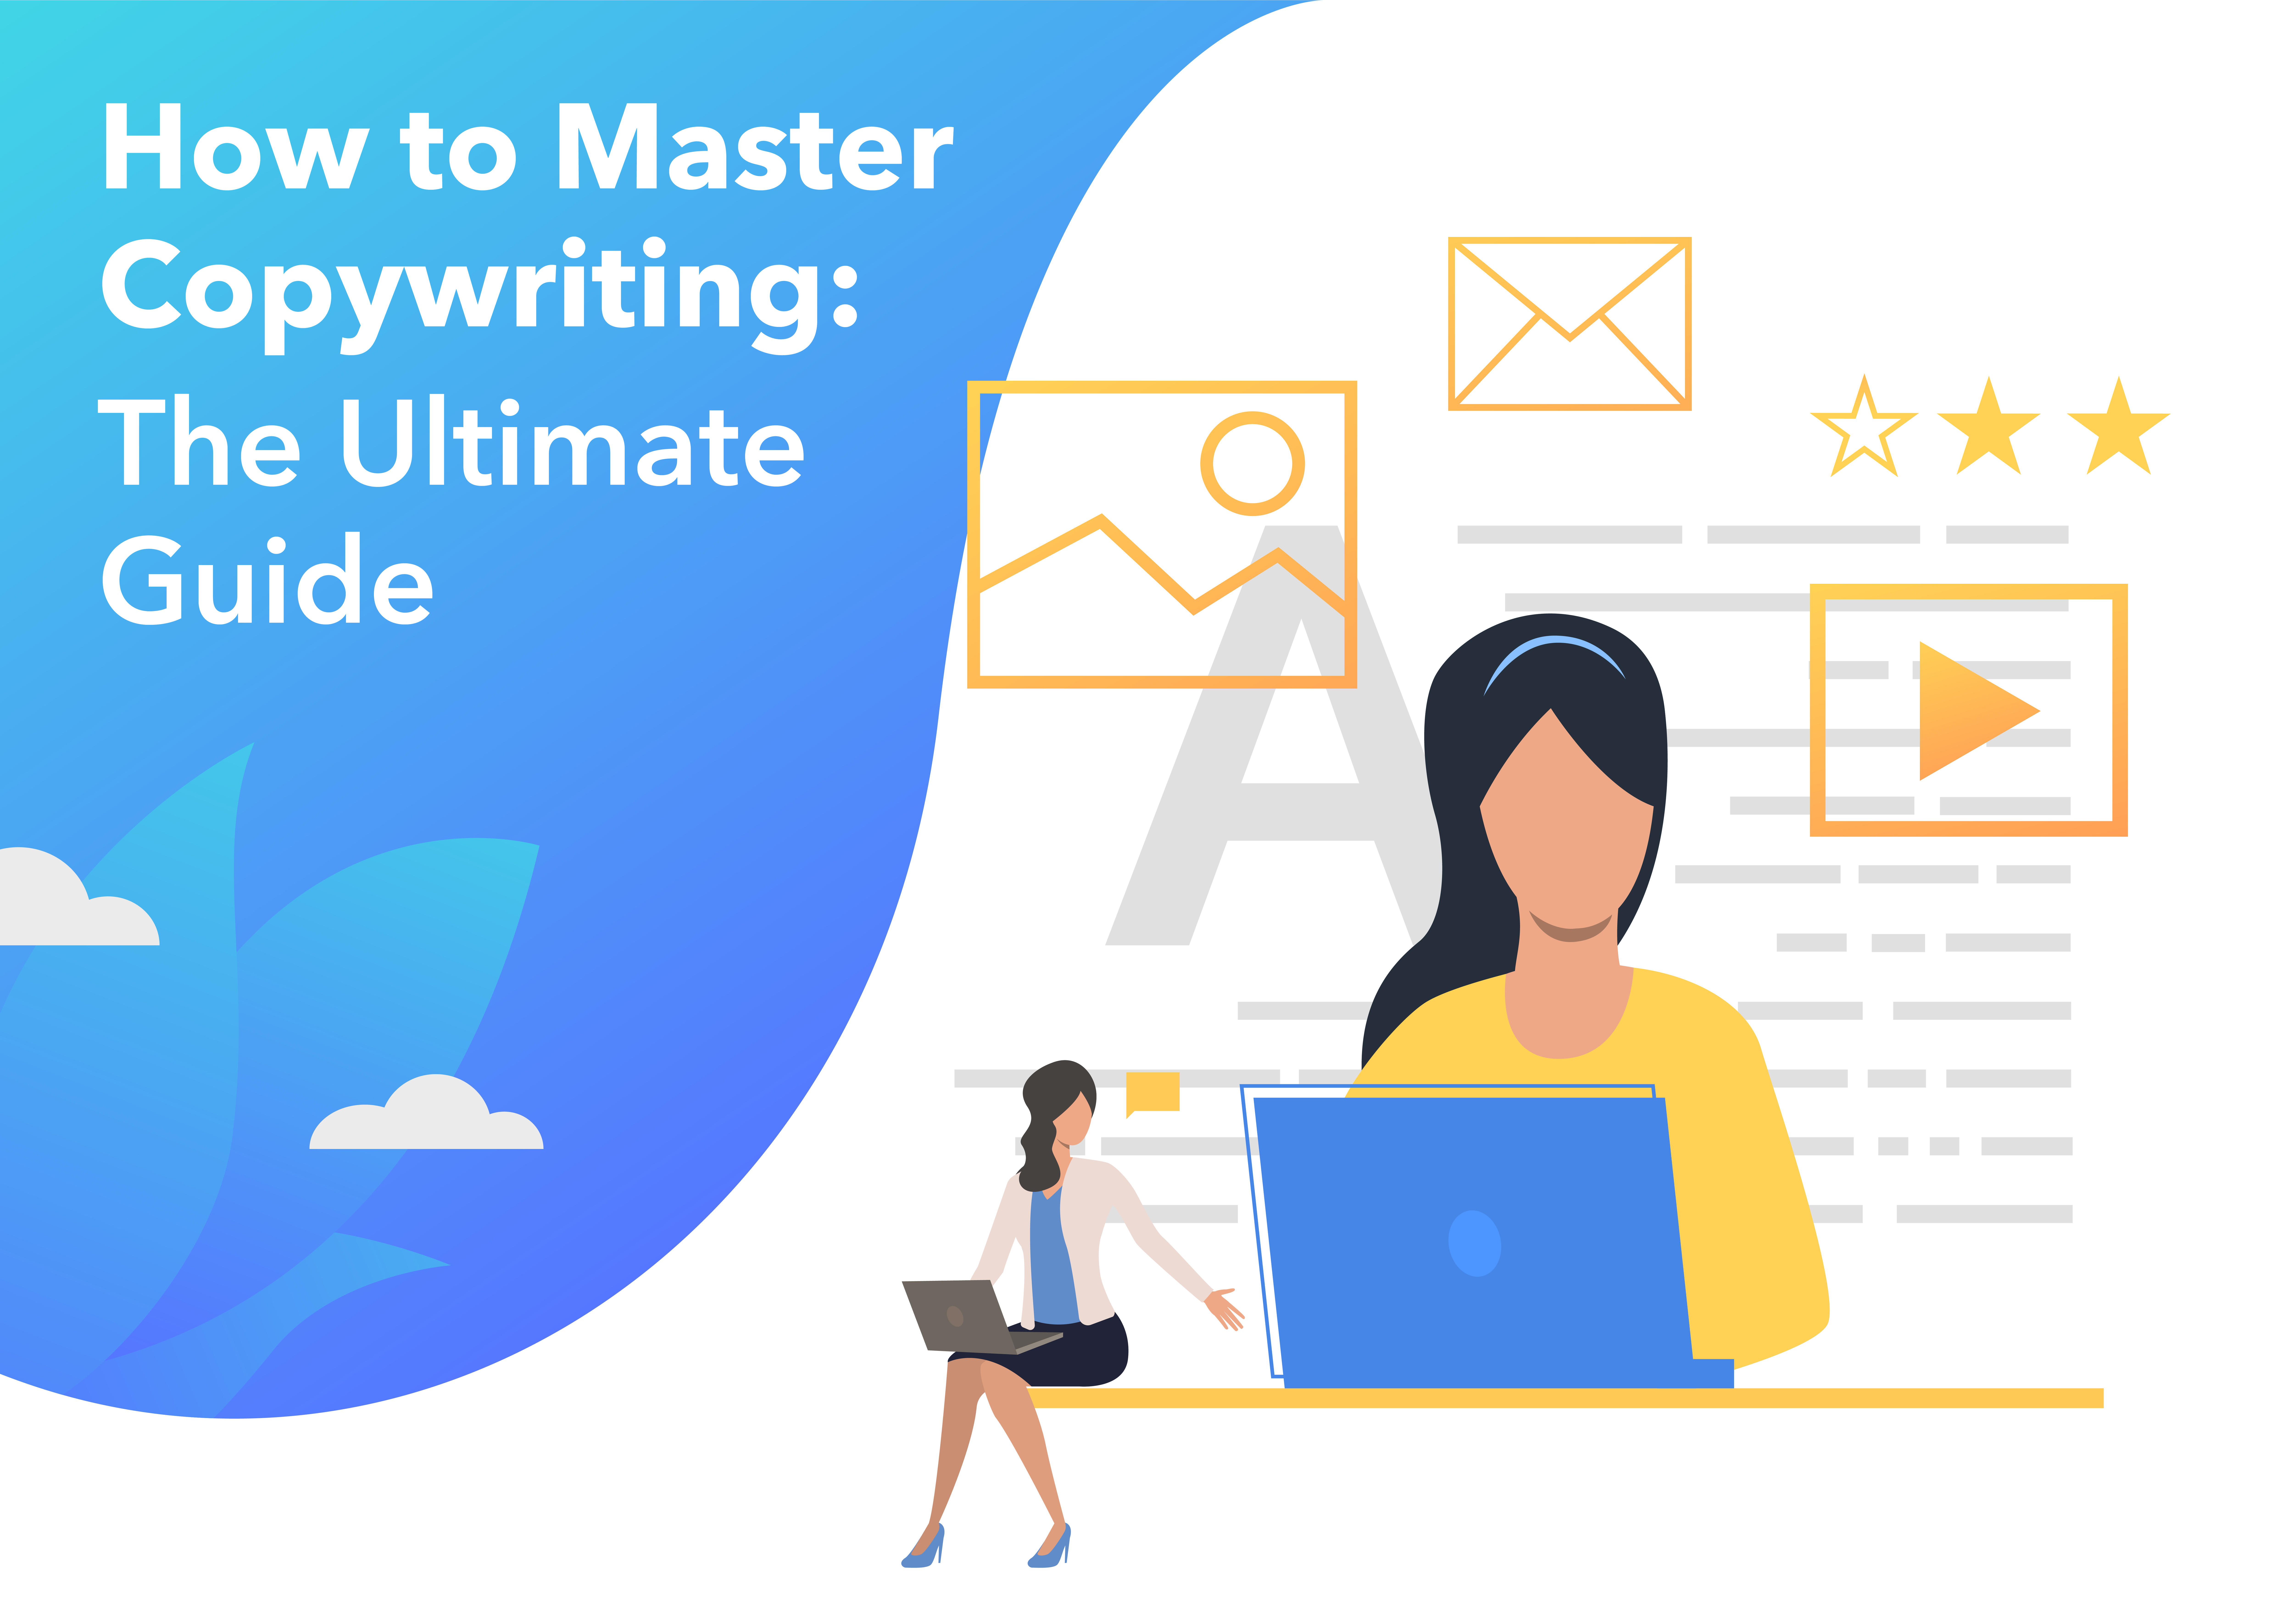 How to Master Copywriting: The Ulitmate Guide